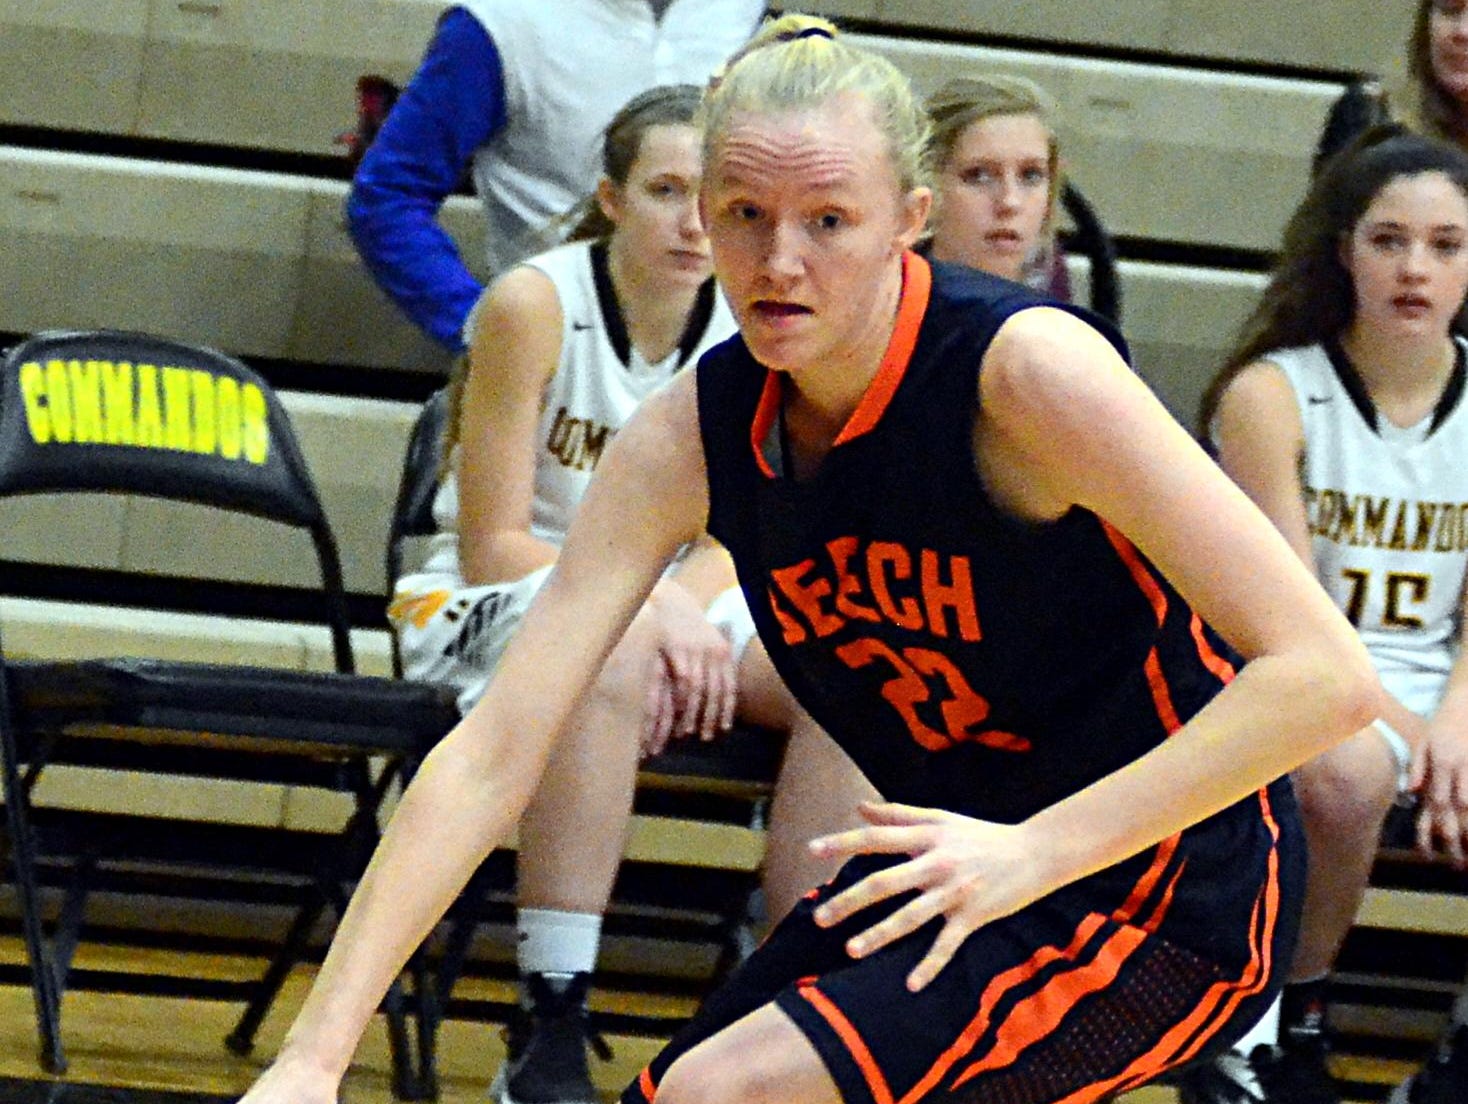 Beech High freshman forward Kendra Mueller drives to the basket during second-quarter action. Mueller scored two points.